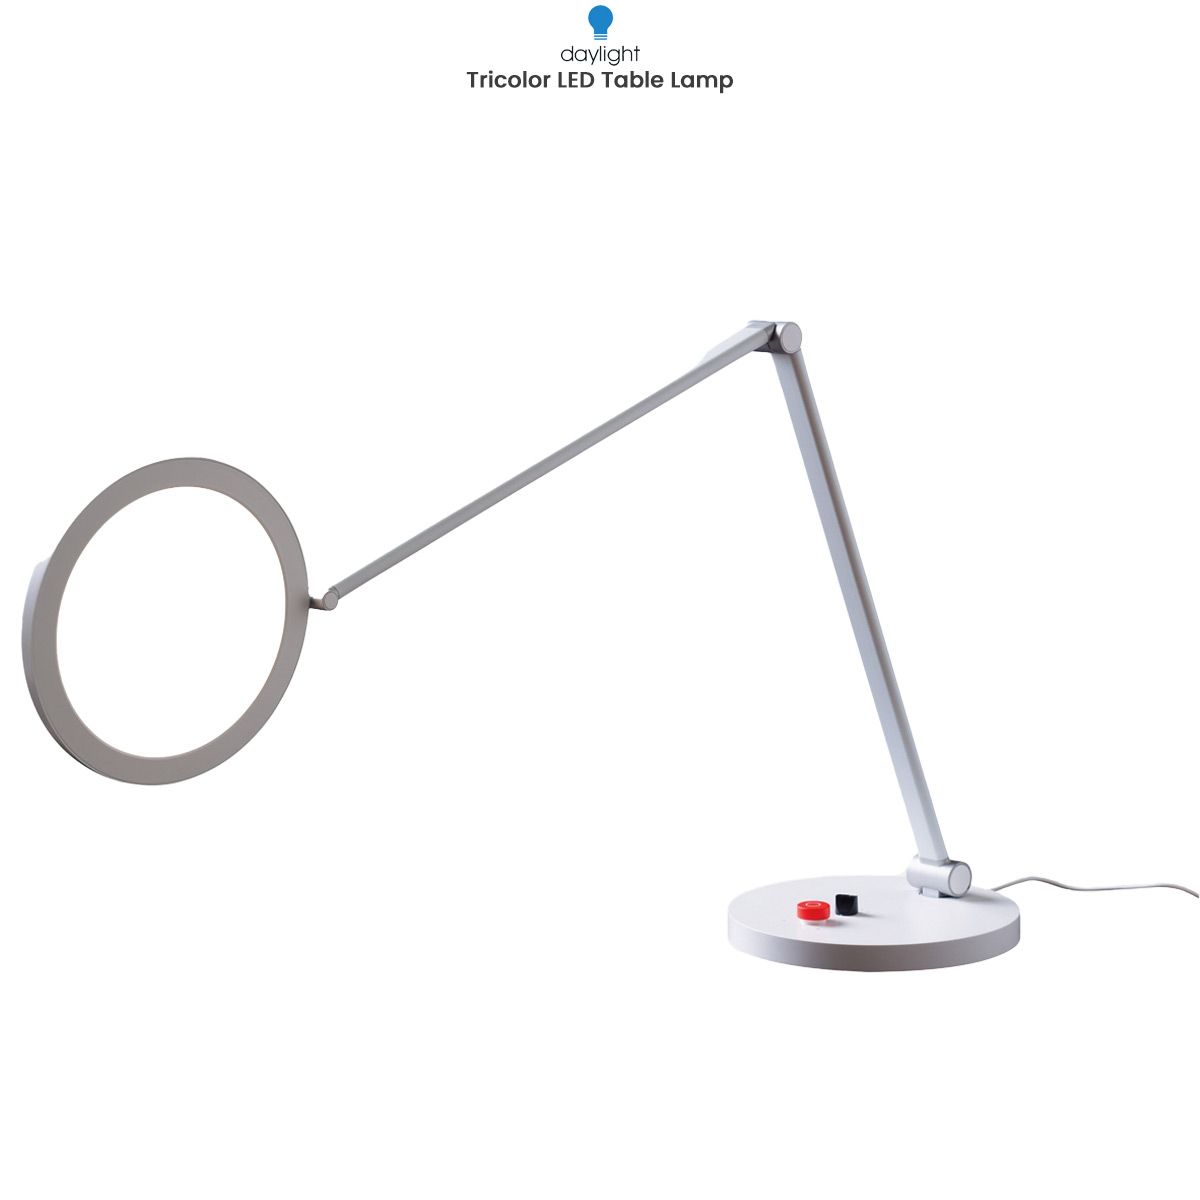 Daylight Tricolor LED Table Lamp